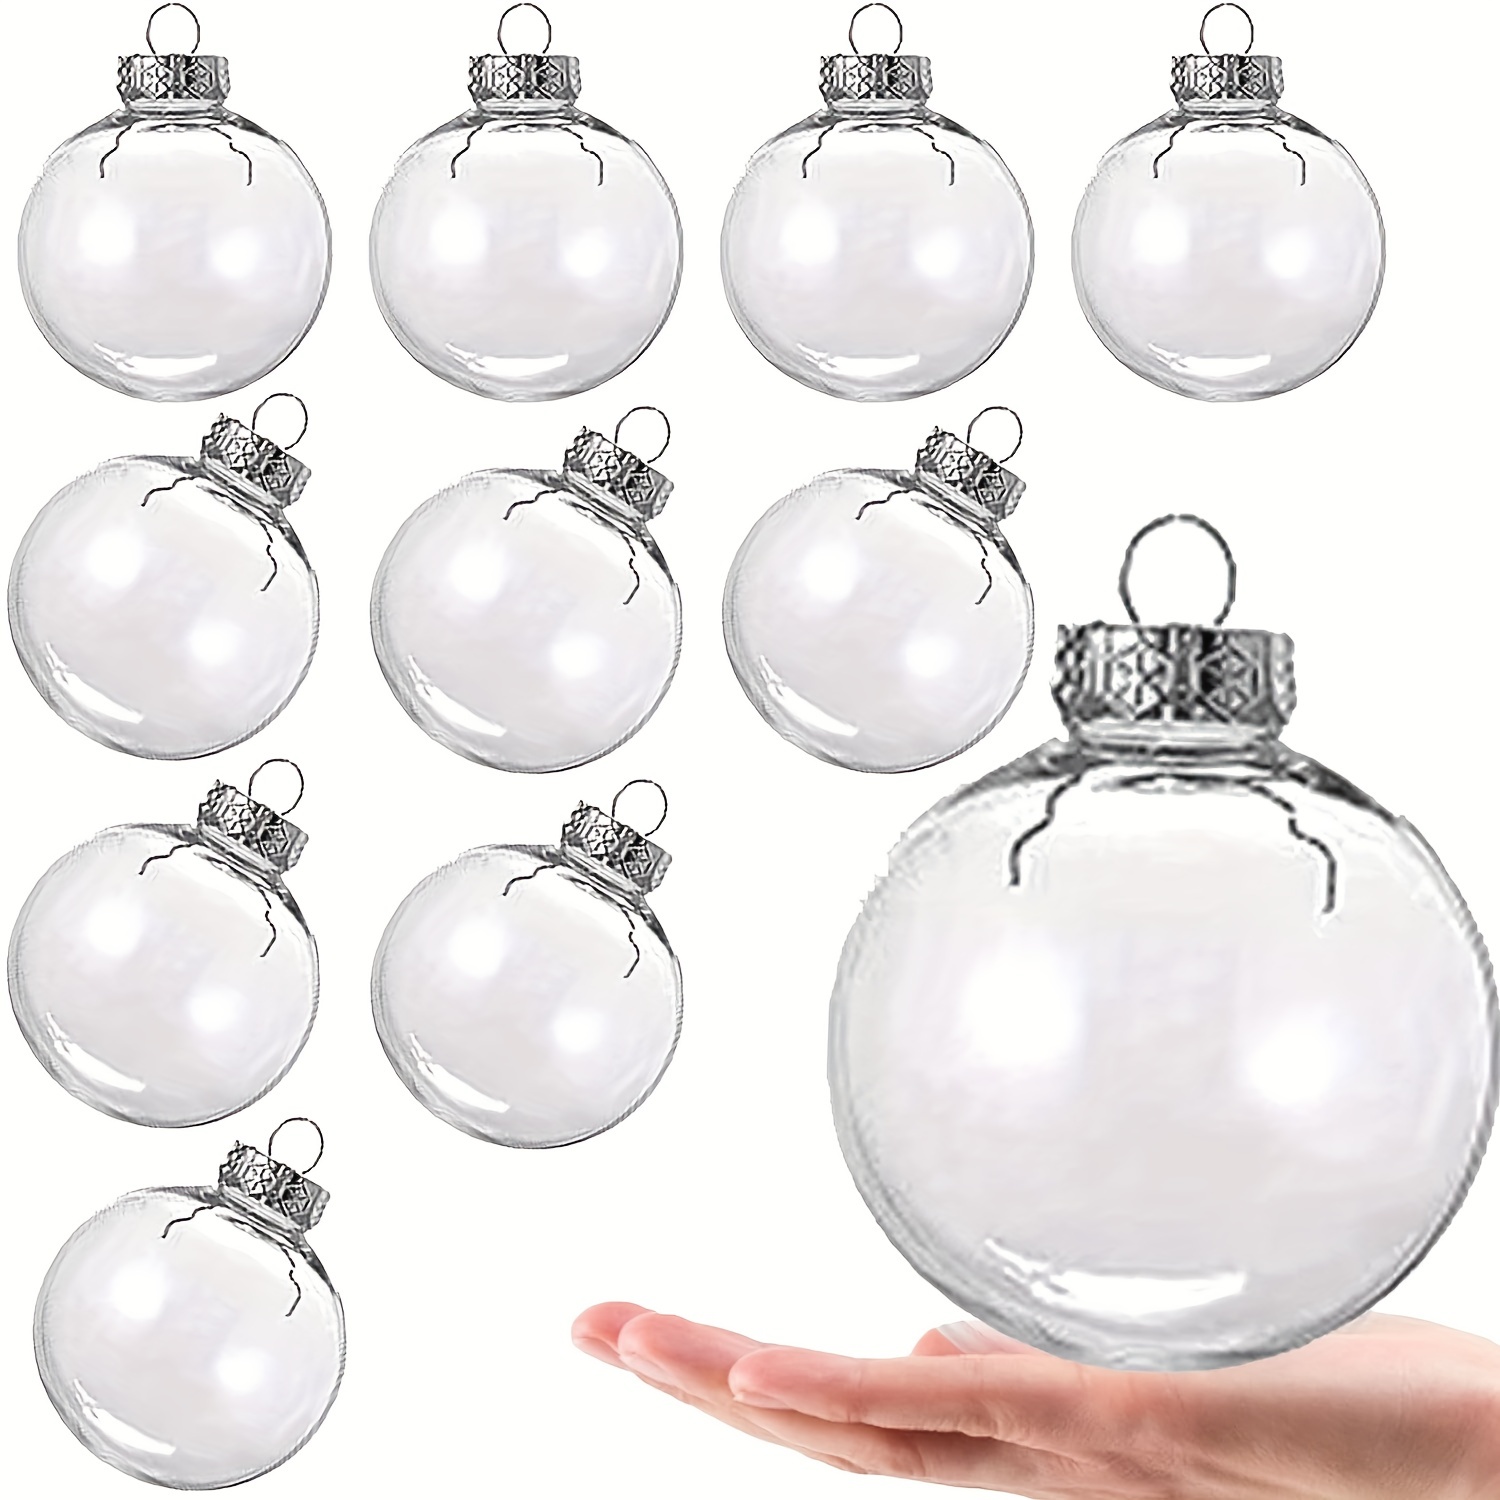  24 Pcs Clear Plastic Fillable Ornament Balls,70mm DIY Fillable  Christmas Ornaments Balls for Christmas,Holiday, Wedding,Party,Home Decor :  Home & Kitchen